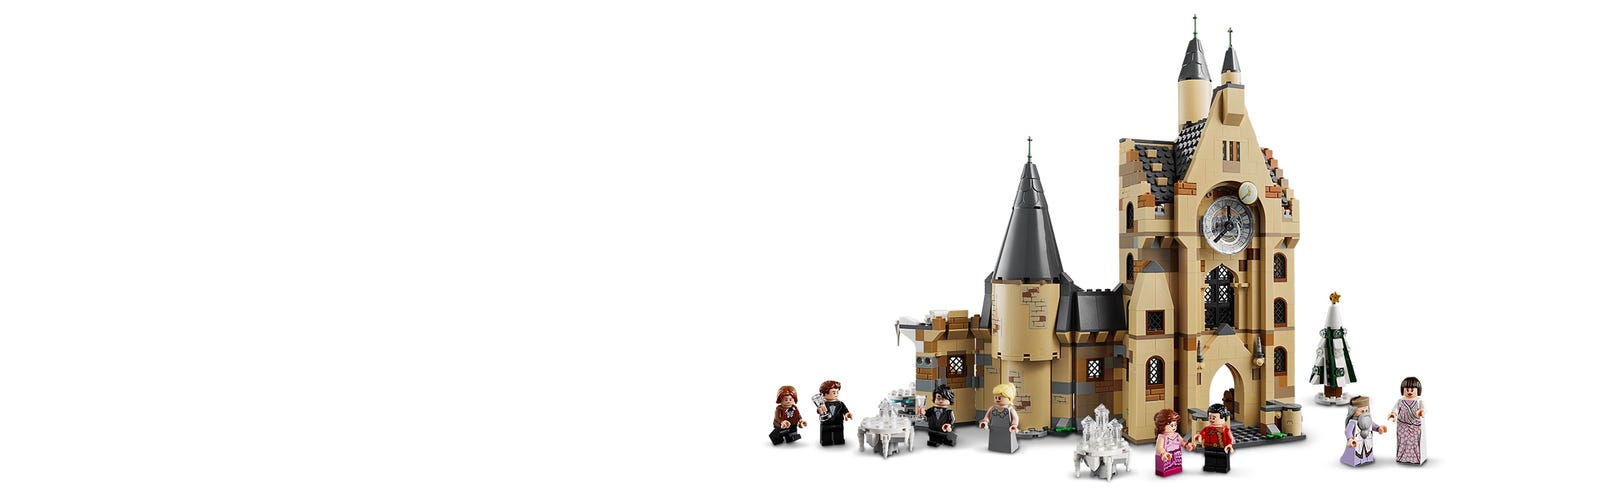 Hogwarts™ Clock Tower 75948 | Harry Buy online at the Official LEGO® Shop US